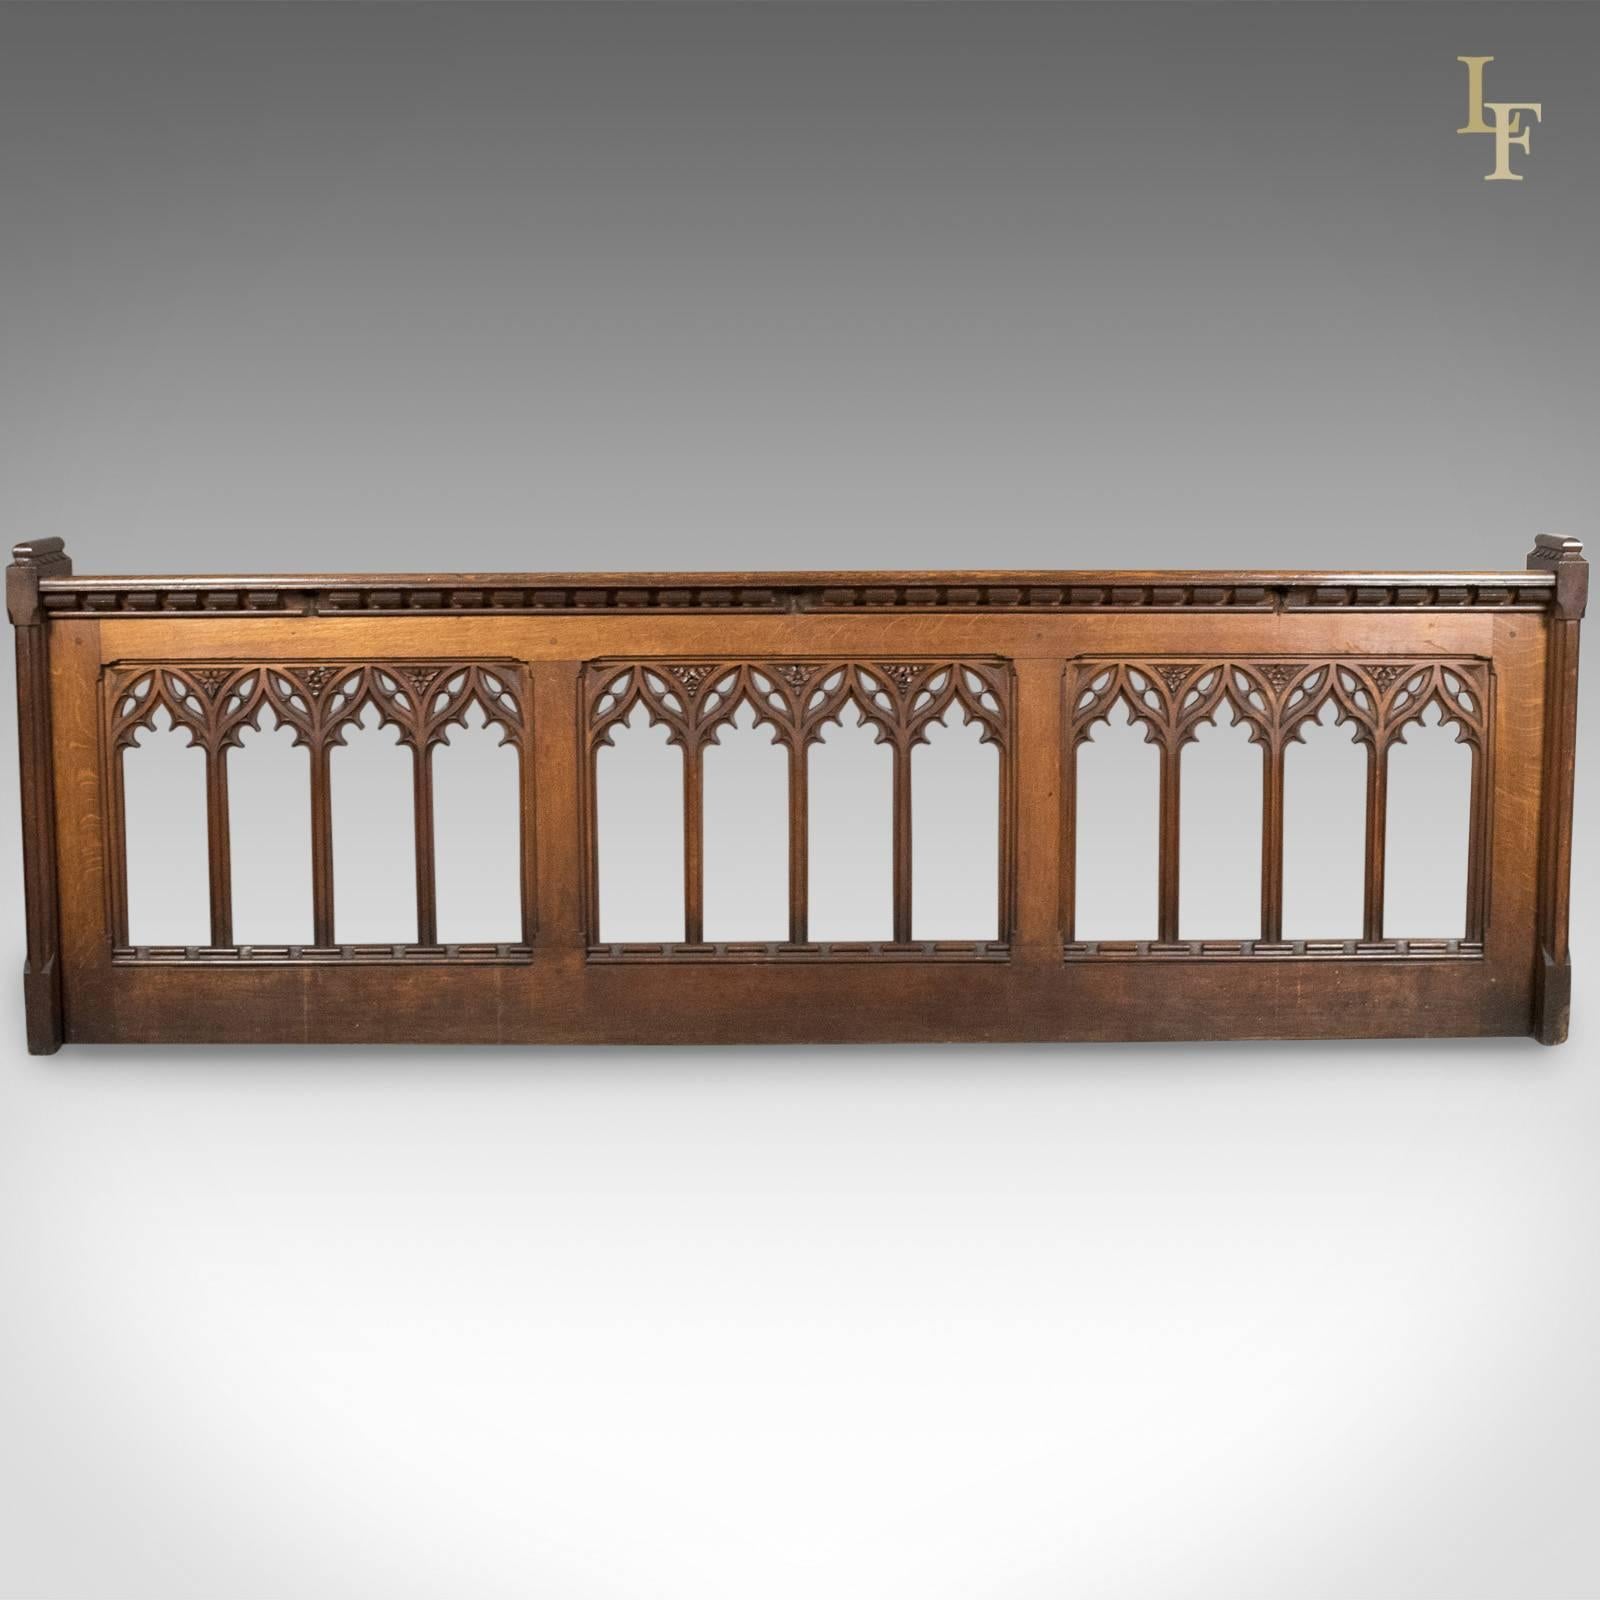 This is an antique pew front, a Victorian gothic choir stall in English oak with Pugin overtones, circa 1880.

Superbly carved and in fine order
Golden hues to the well figured oak
Robust and sturdy with a variety of uses

An ecclesiastical